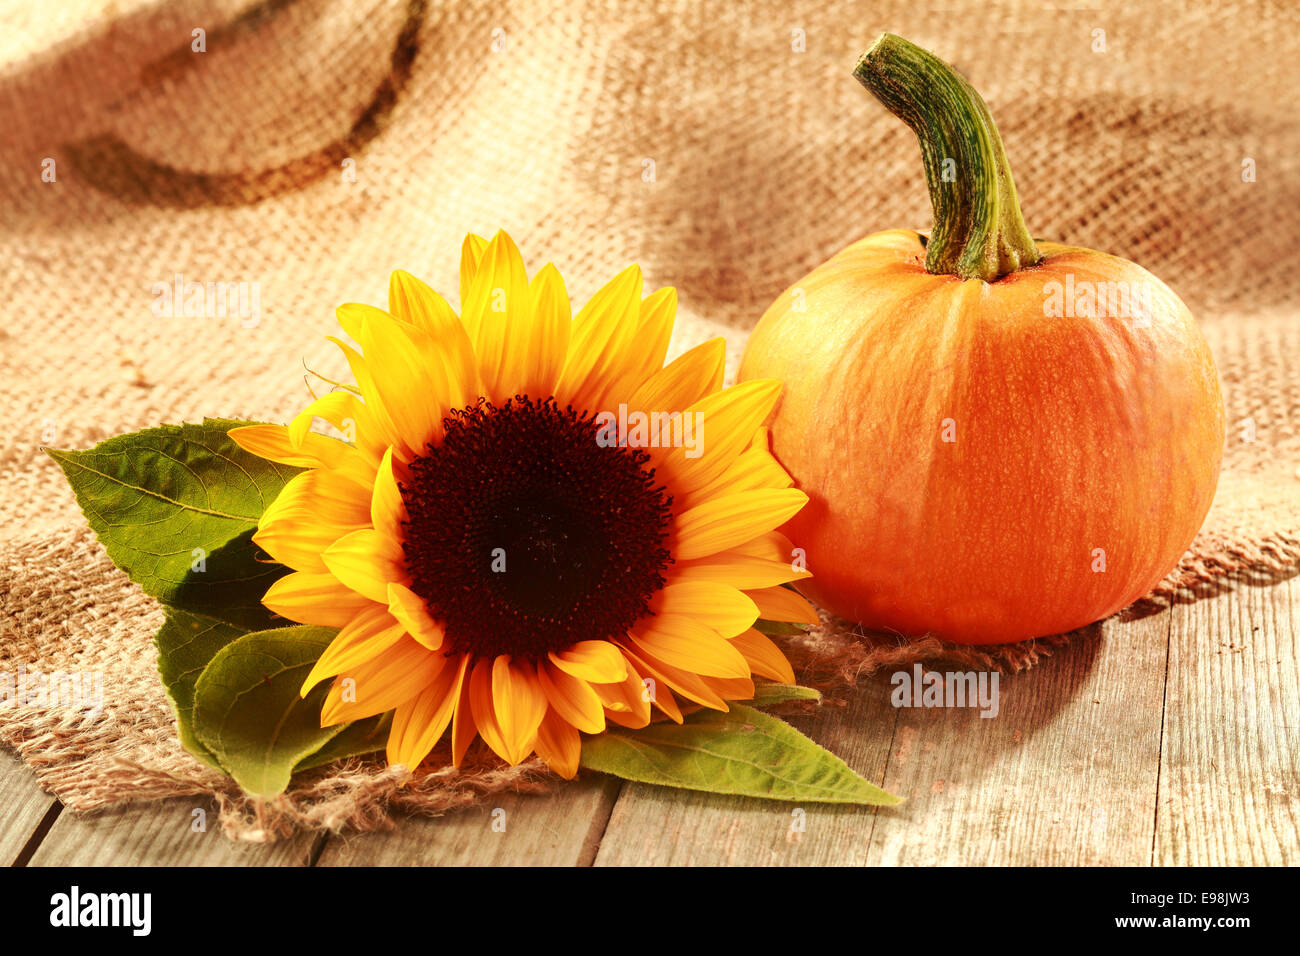 Rustic Thanksgiving background with copyspace and a colorful yellow sunflower with a fresh pumpkin on woven hessian textile Stock Photo